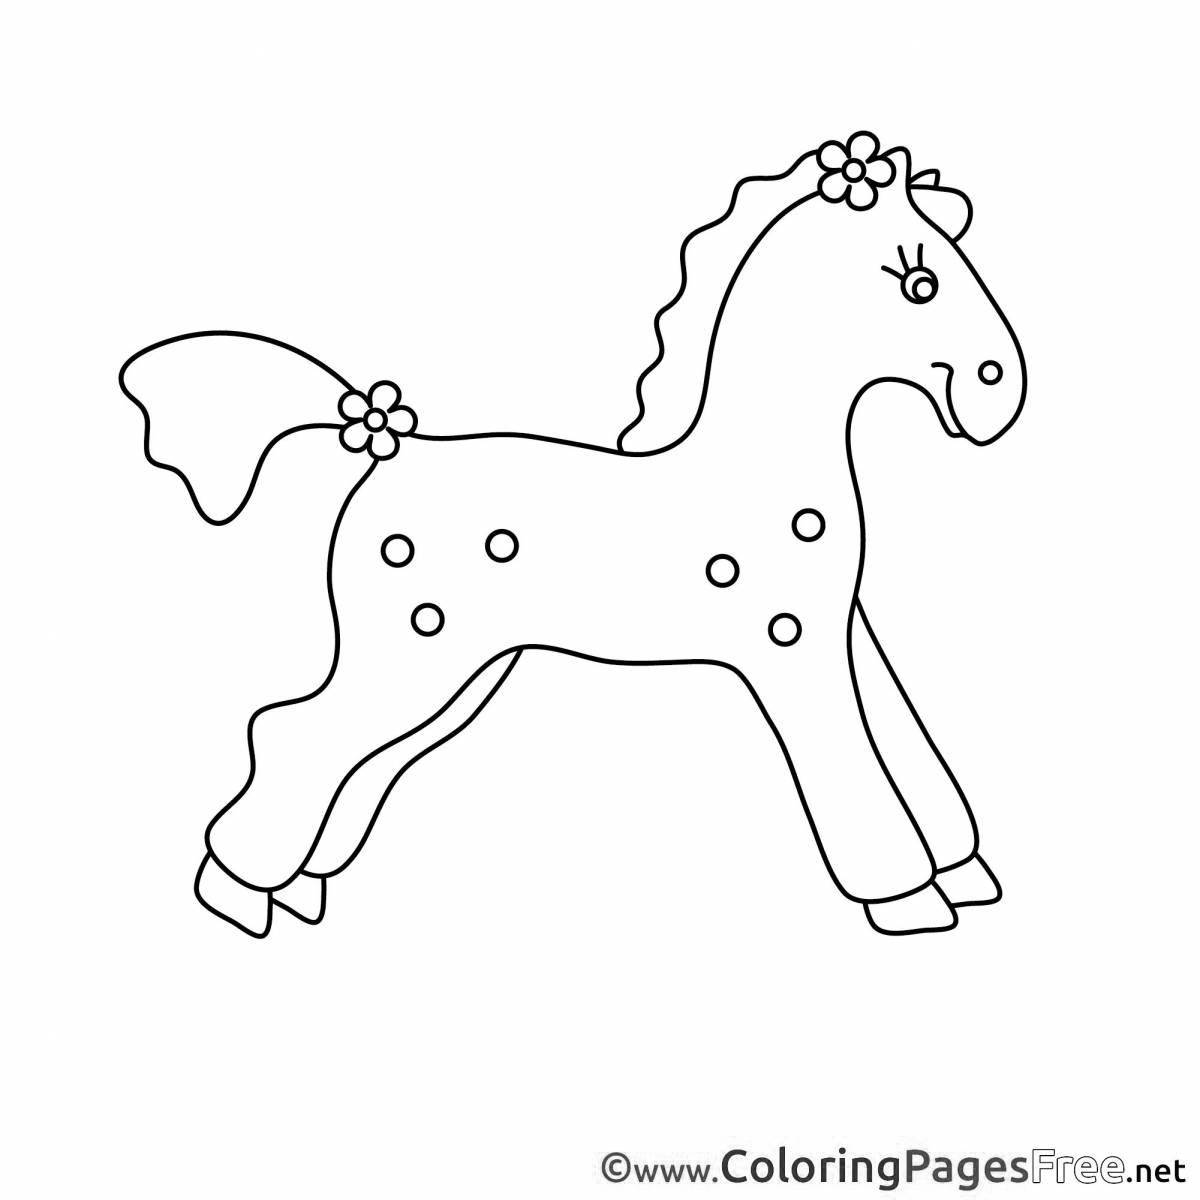 Coloring page charming Dymkovo horse for children